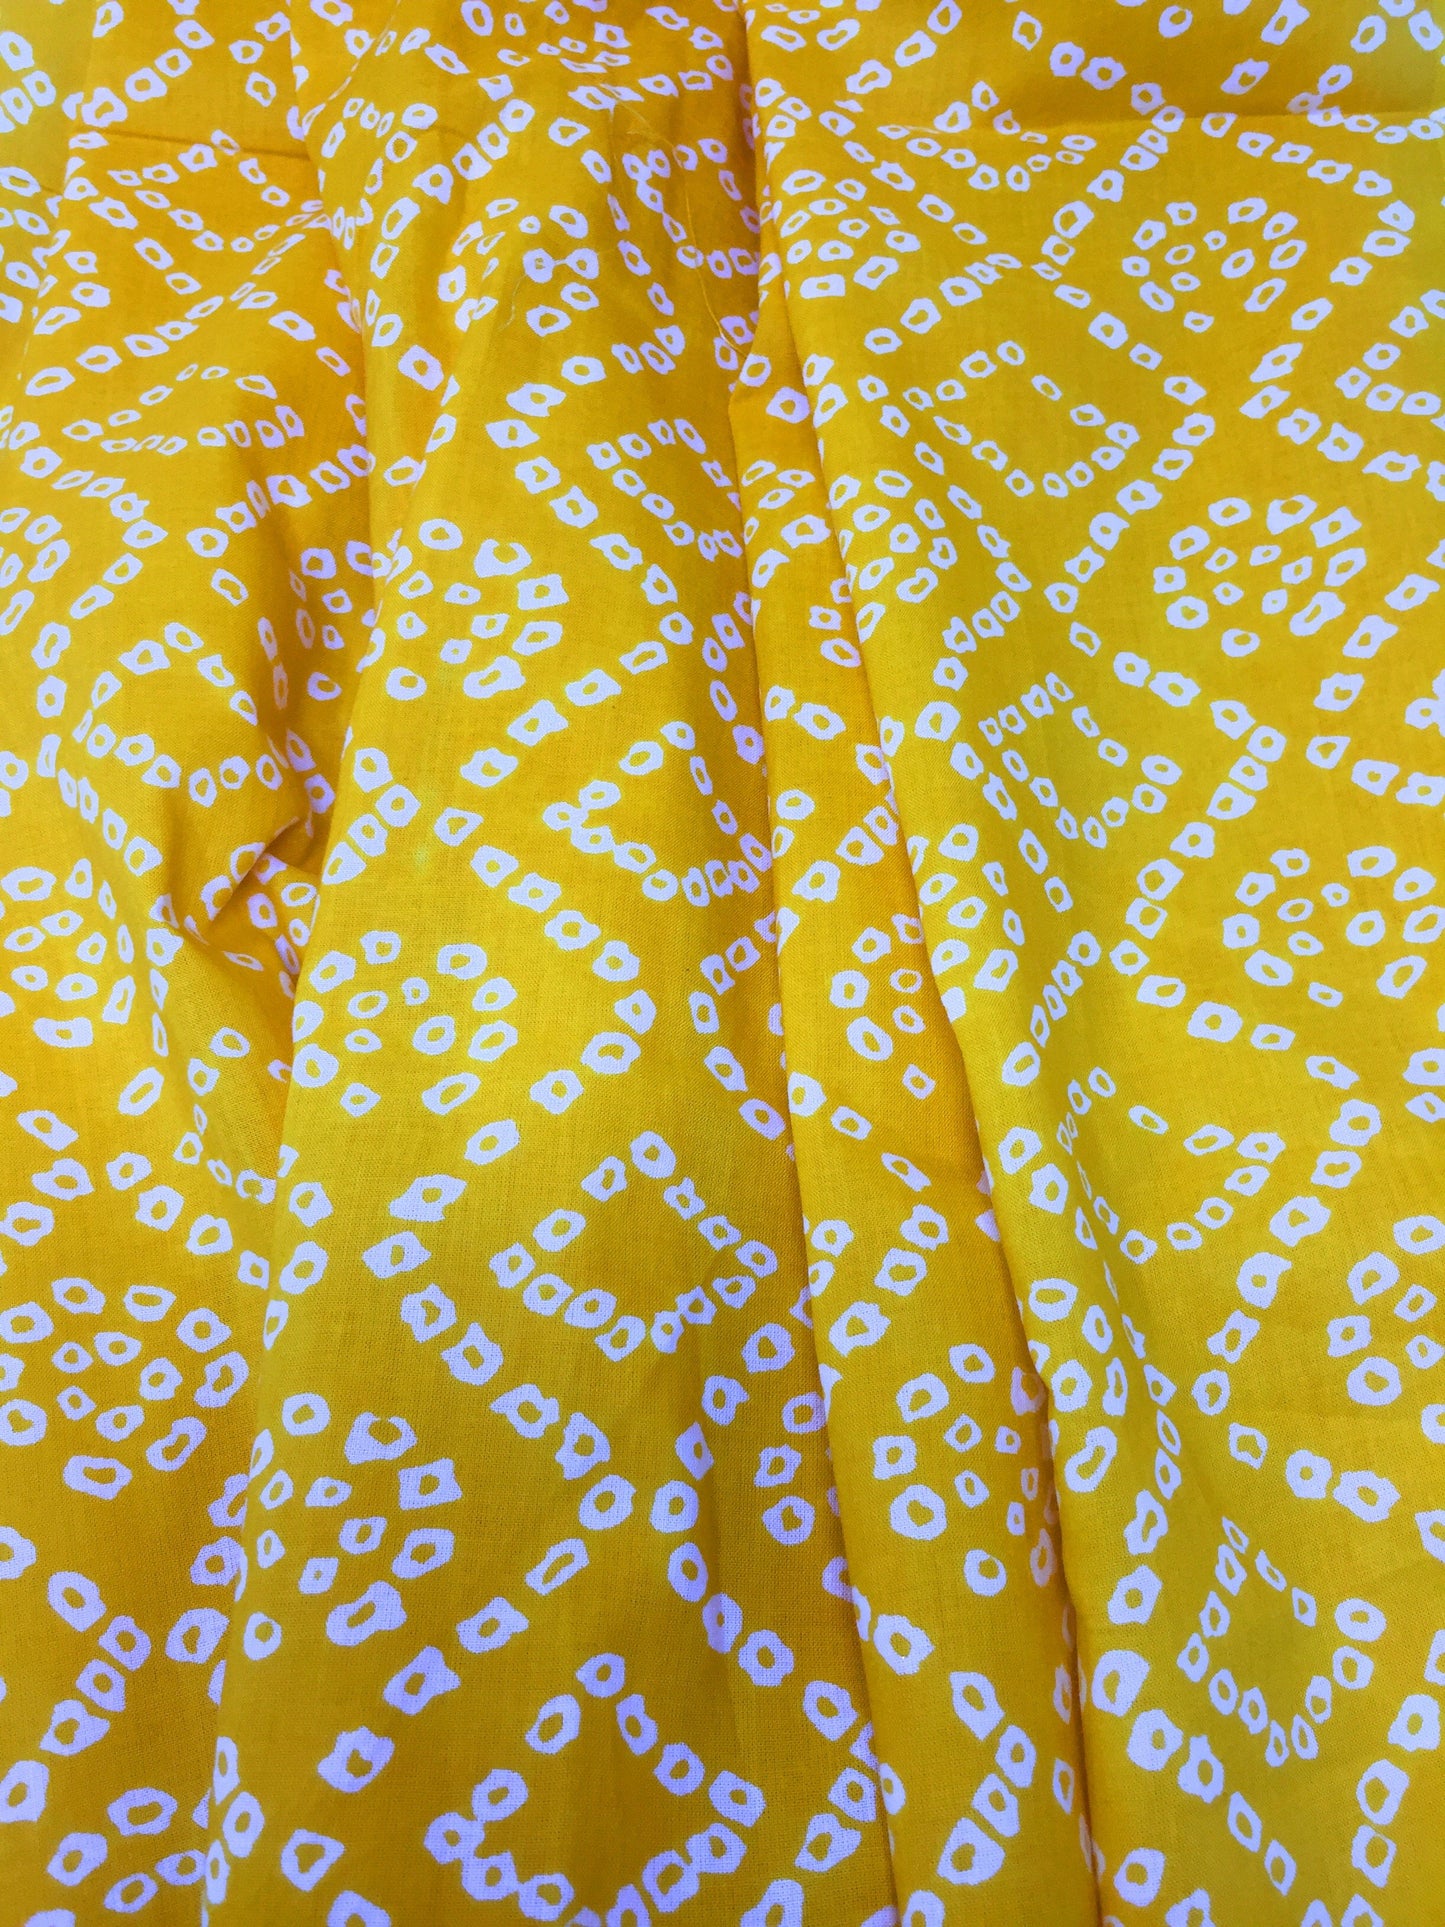 Pure Cotton Yellow Printed Fabric Material